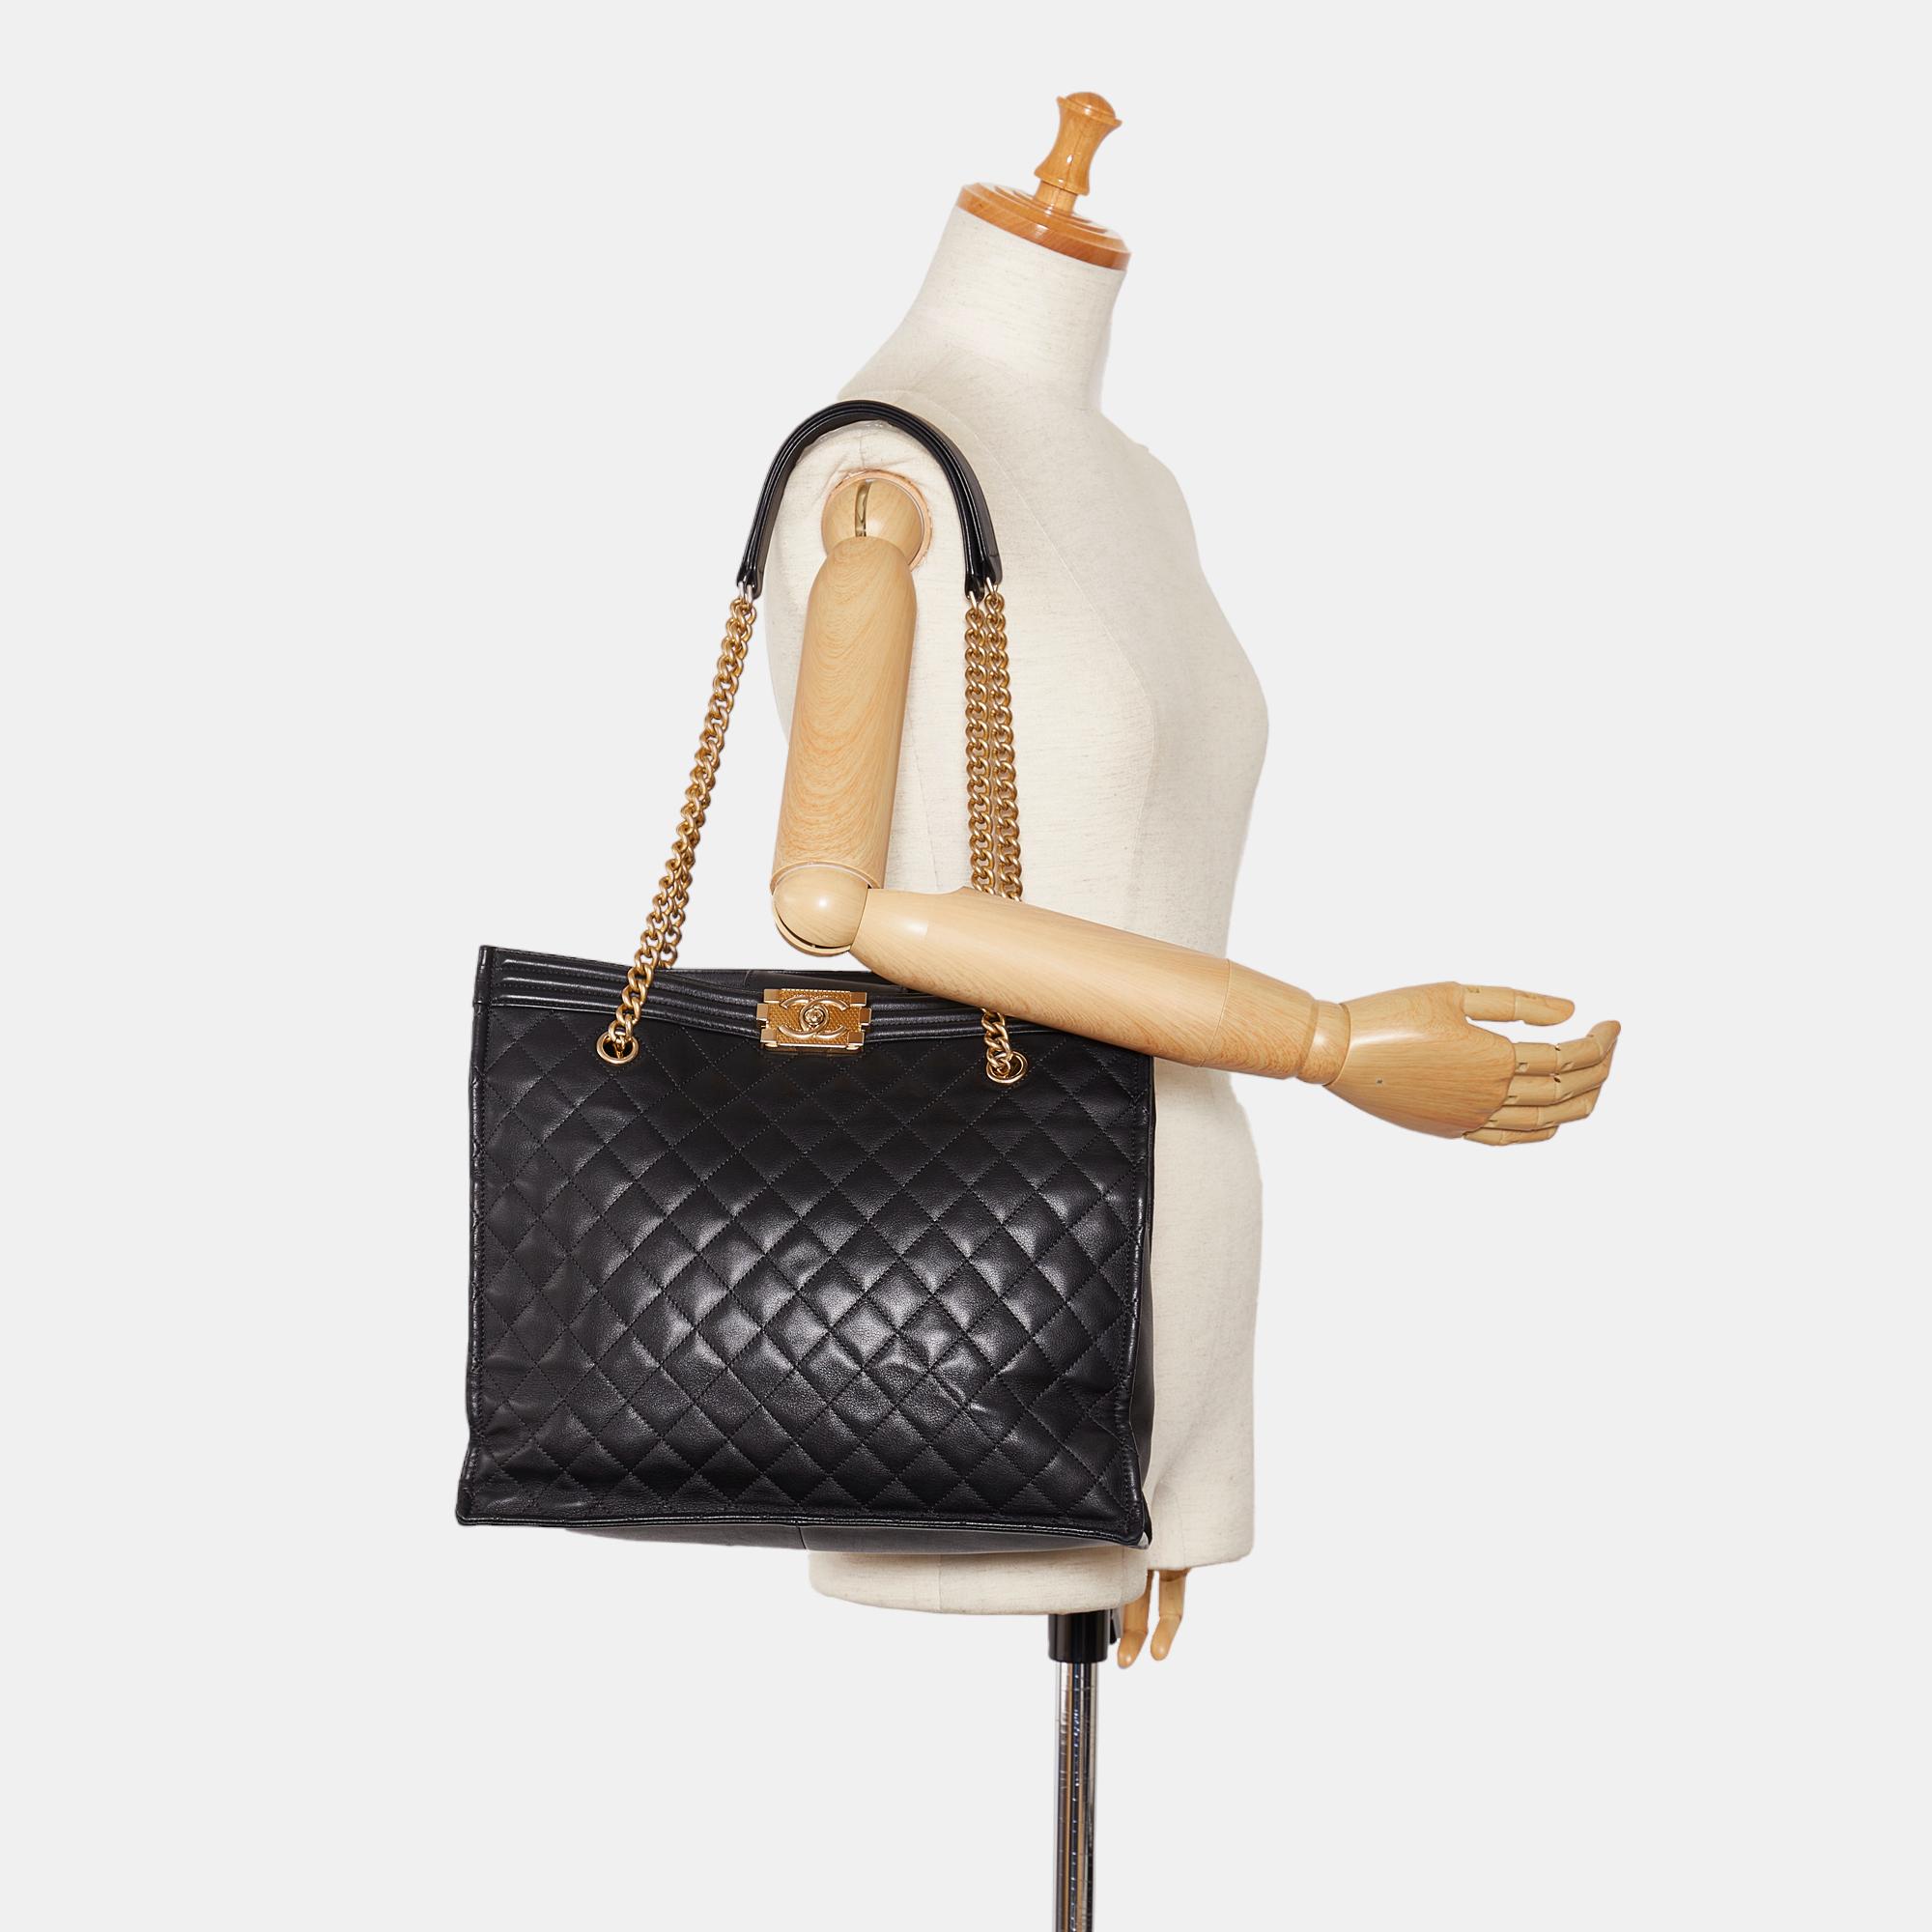 Chanel Black Quilted Boy Shopper Tote